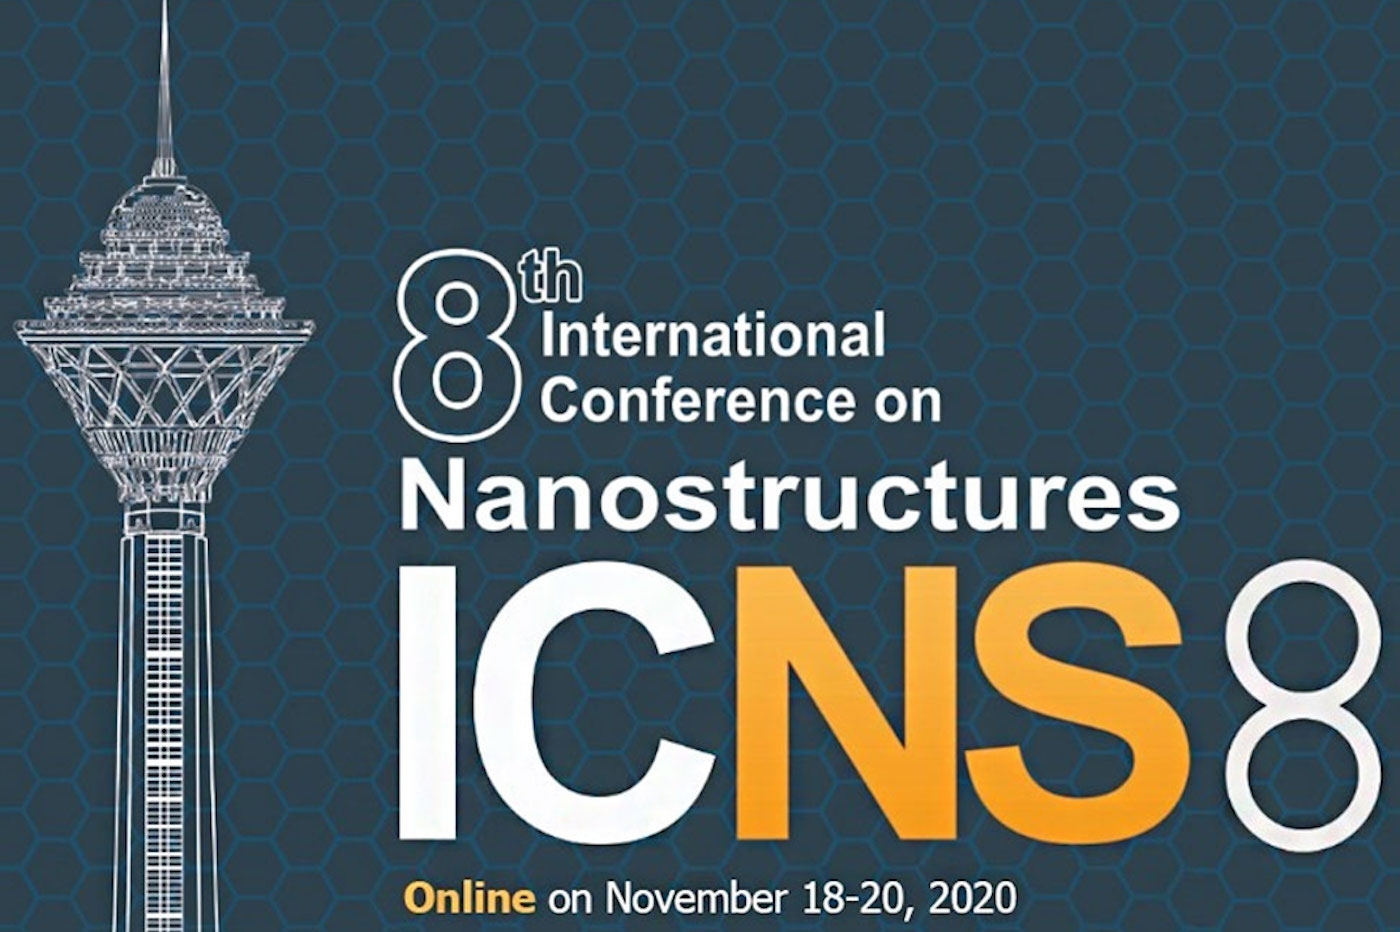 The 8th International Conference on Nanostructure was successfully held on November 18-20, 2020. 